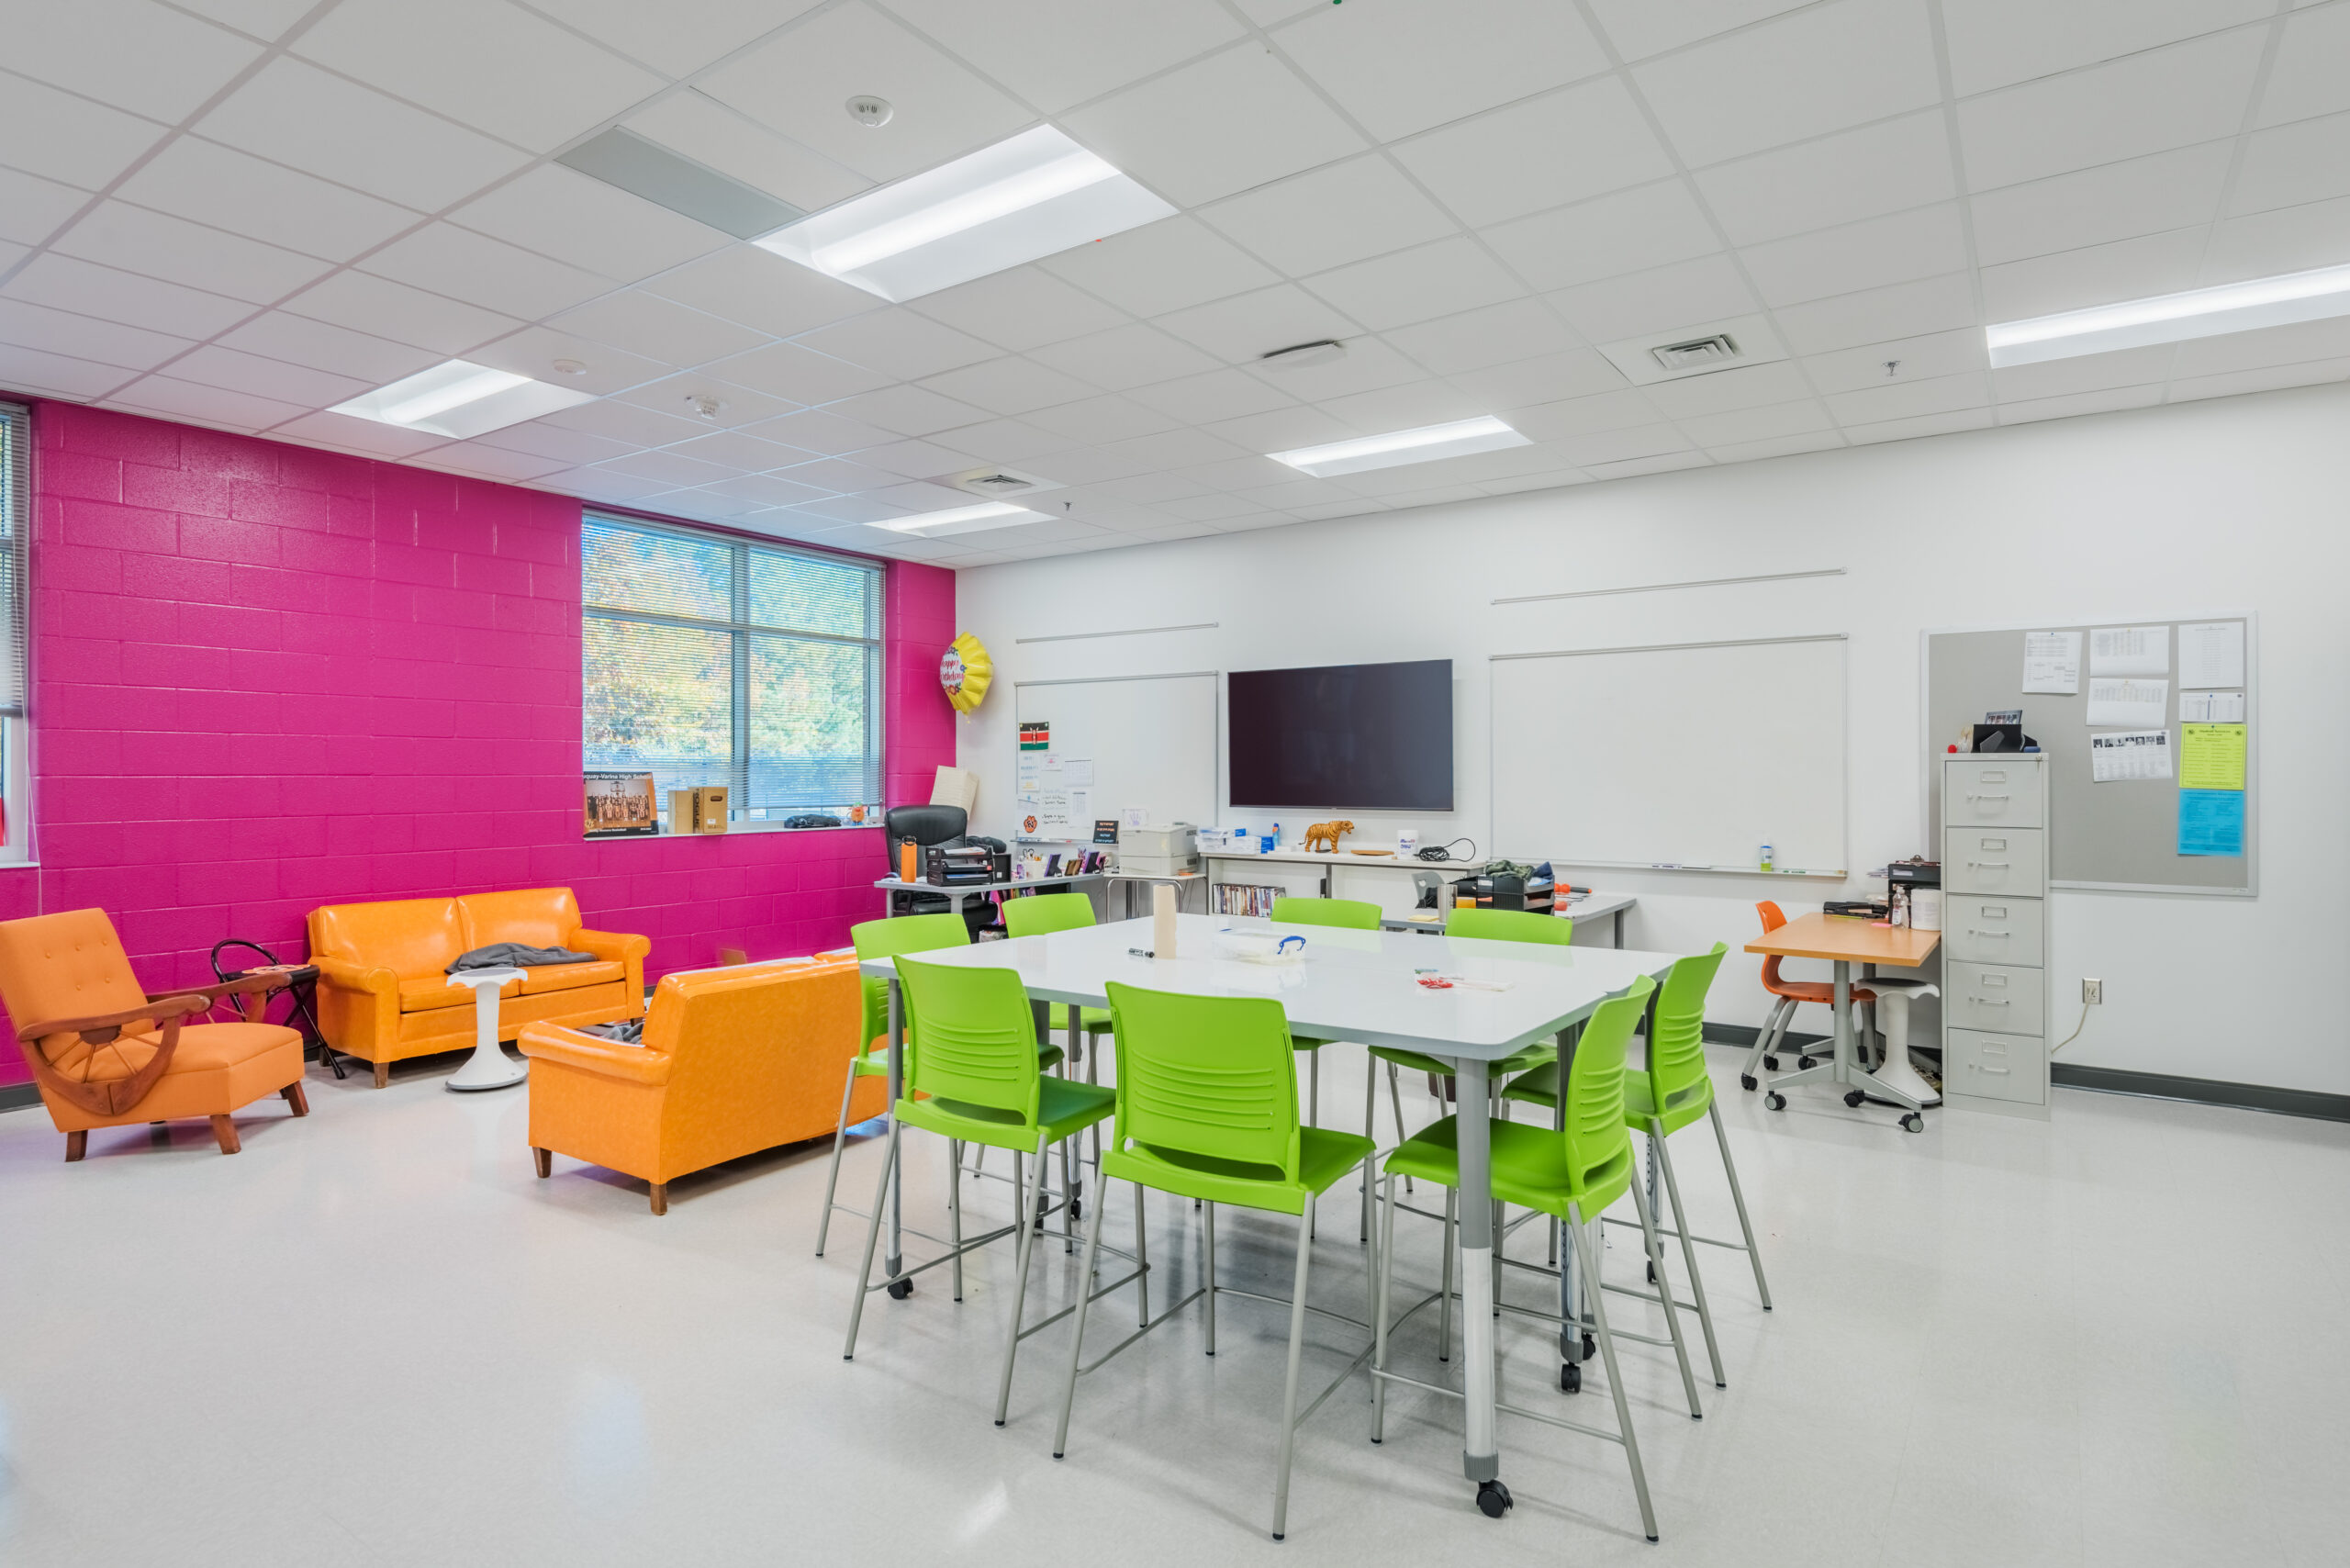 Fuquay-Varina High School Classroom with a Pink Accent Wall, Orange Couches, and Green Chairs